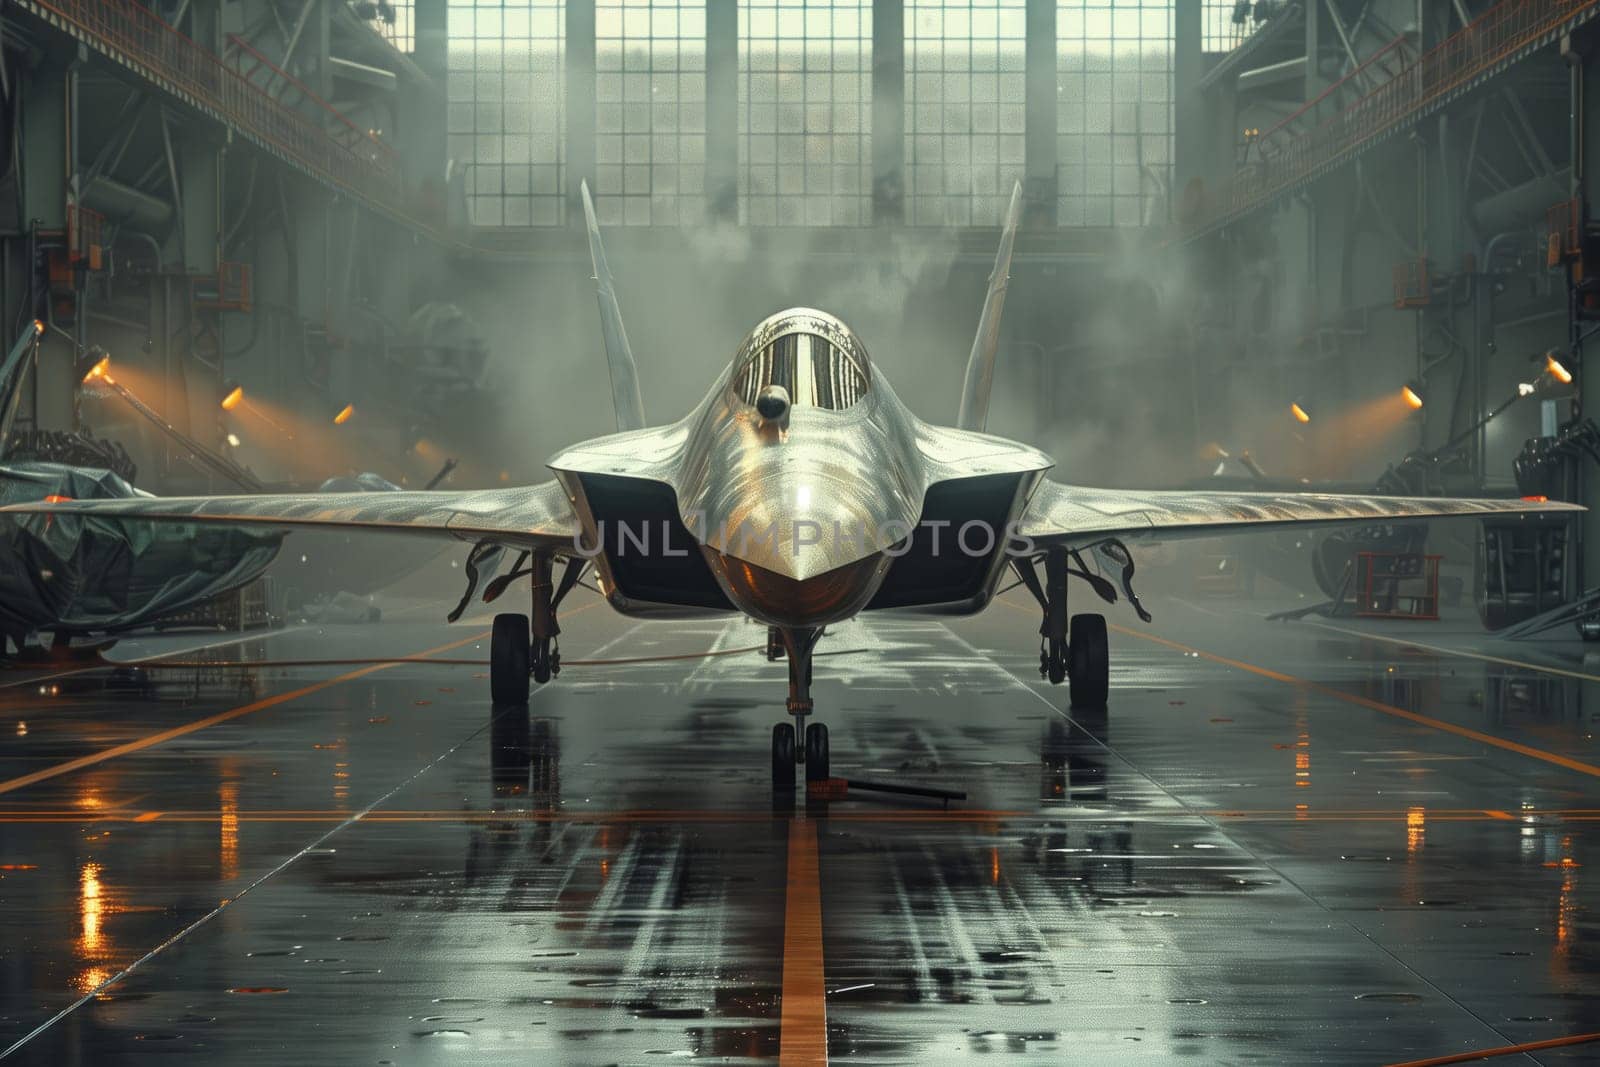 An aircraft is stored in a hangar, awaiting its next mission. The sleek vehicle is a marvel of aerospace engineering, featuring composite materials and a sturdy windshield